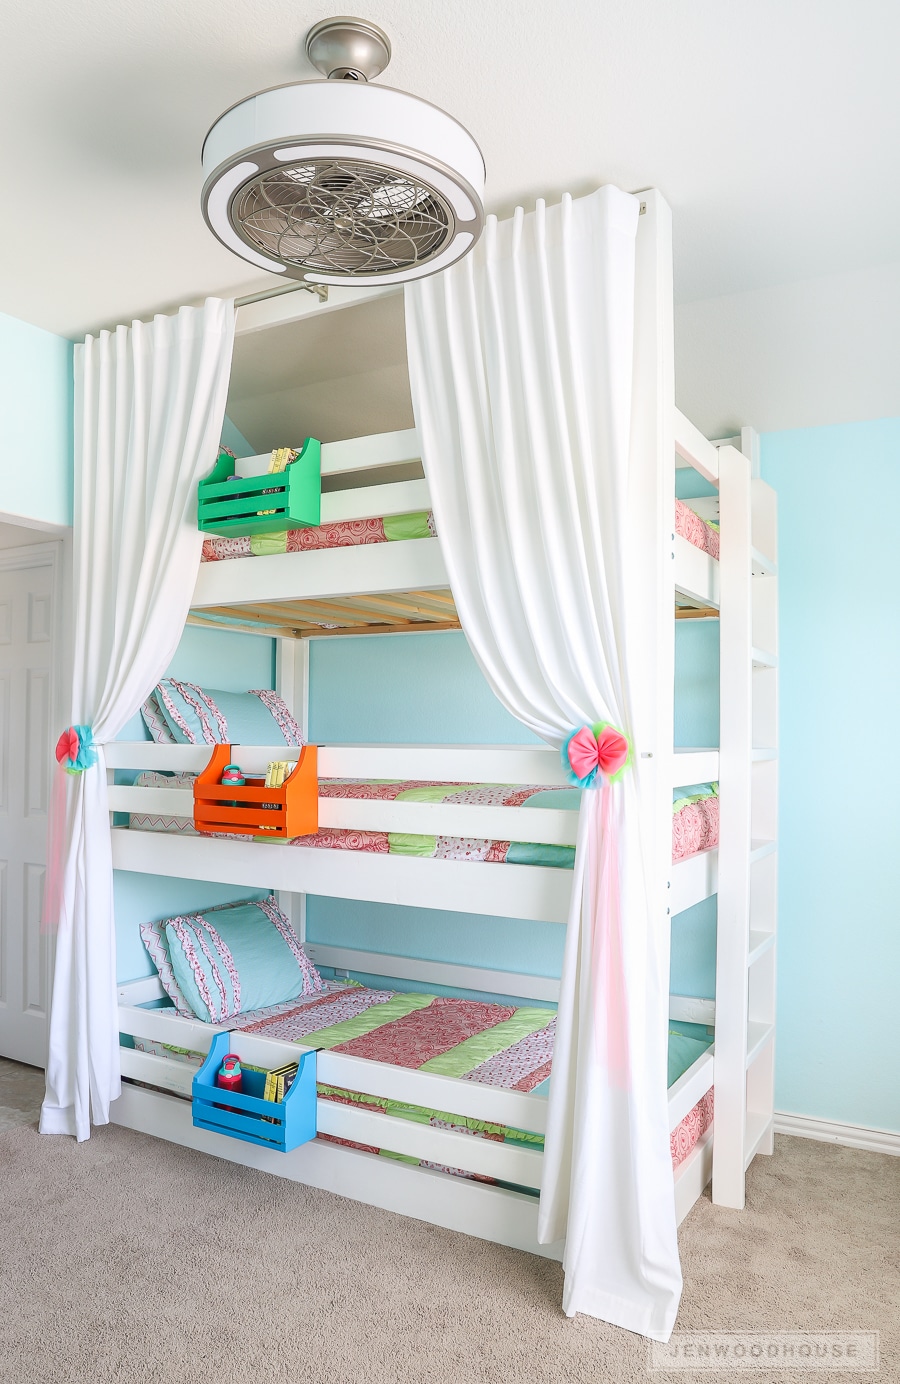 How To Build A Diy Triple Bunk Bed, Simple Bunk Bed Plans